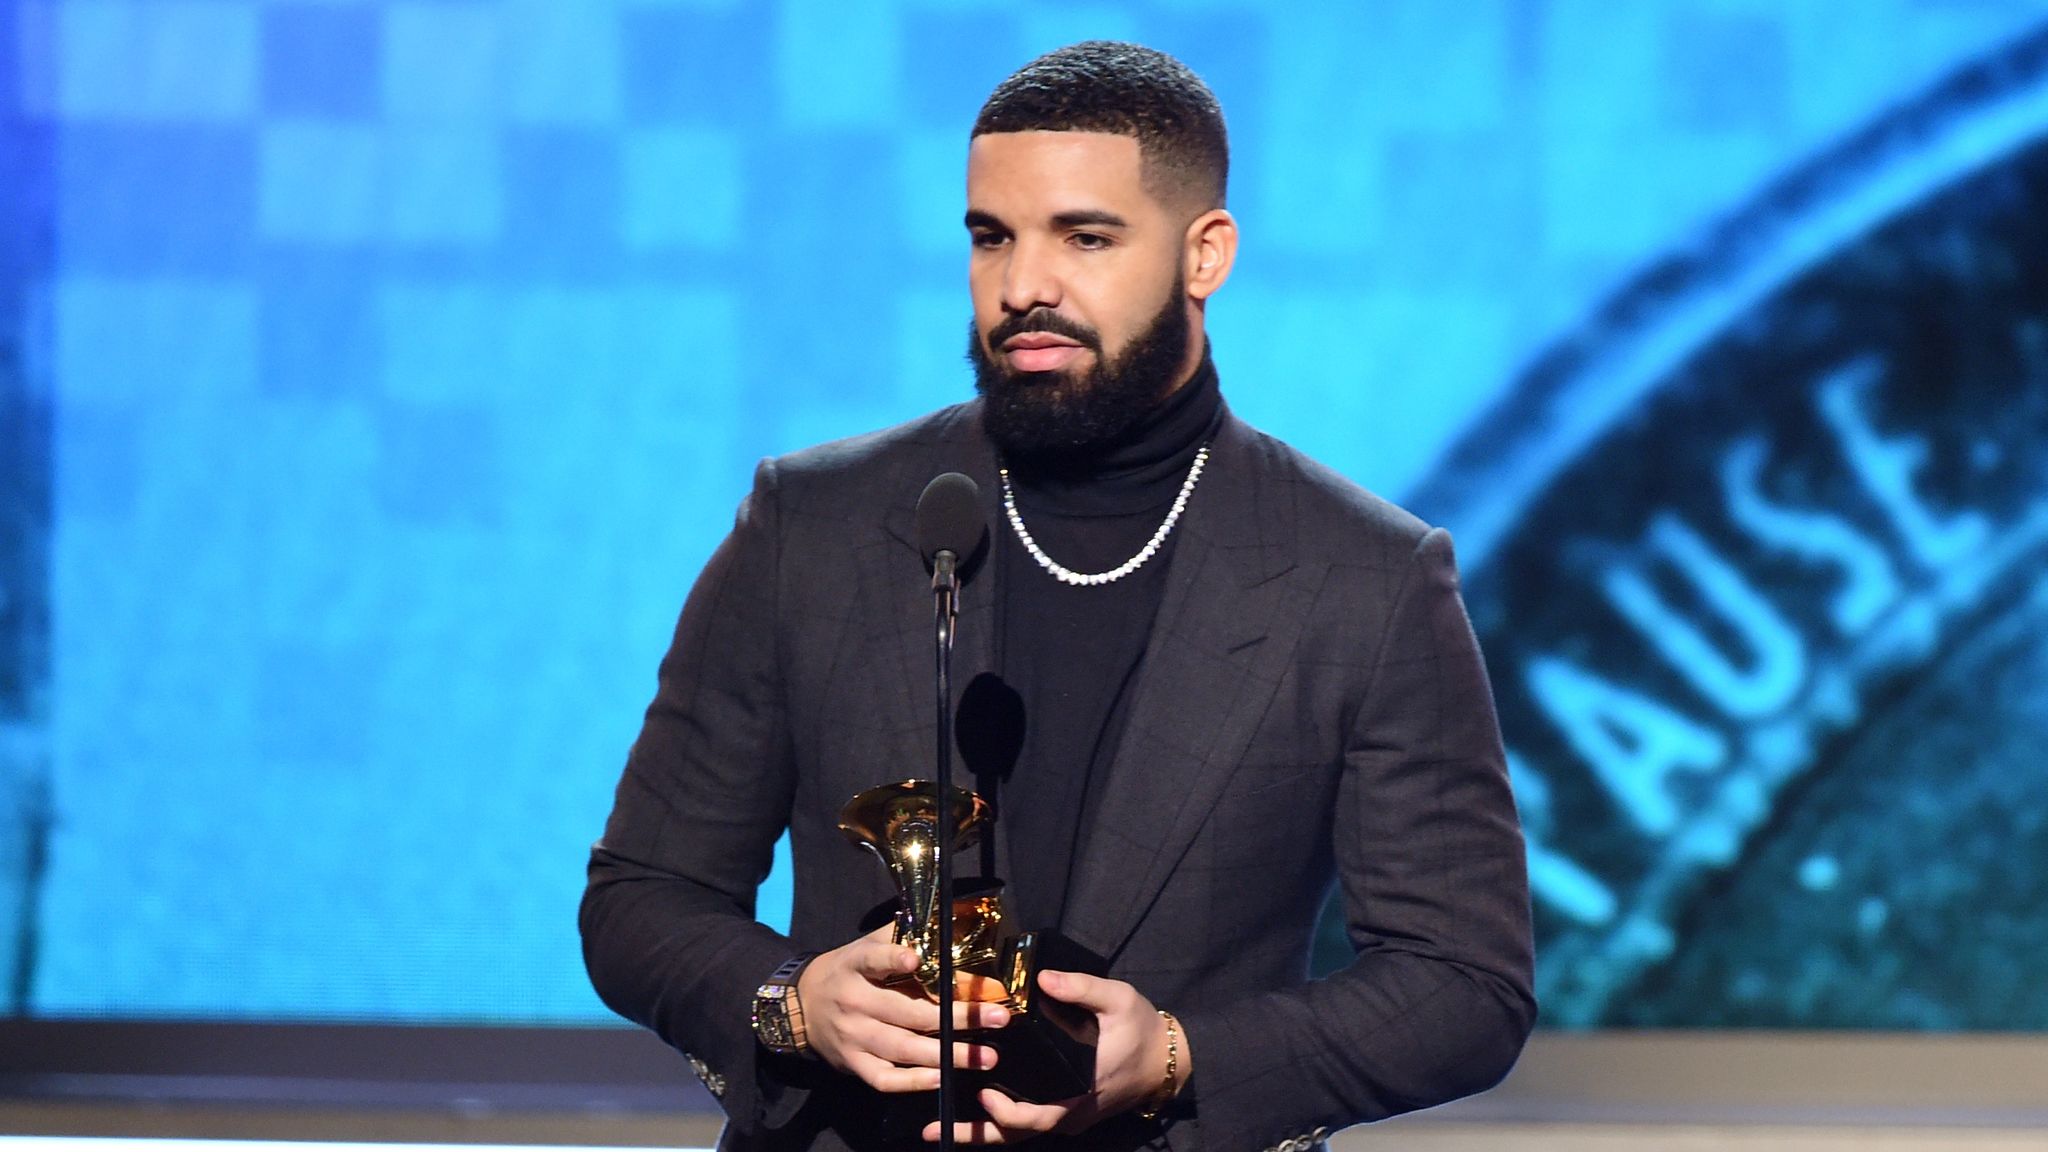 Drake promises to clean his room in childhood note on sale for $7,500 |  Ents & Arts News | Sky News